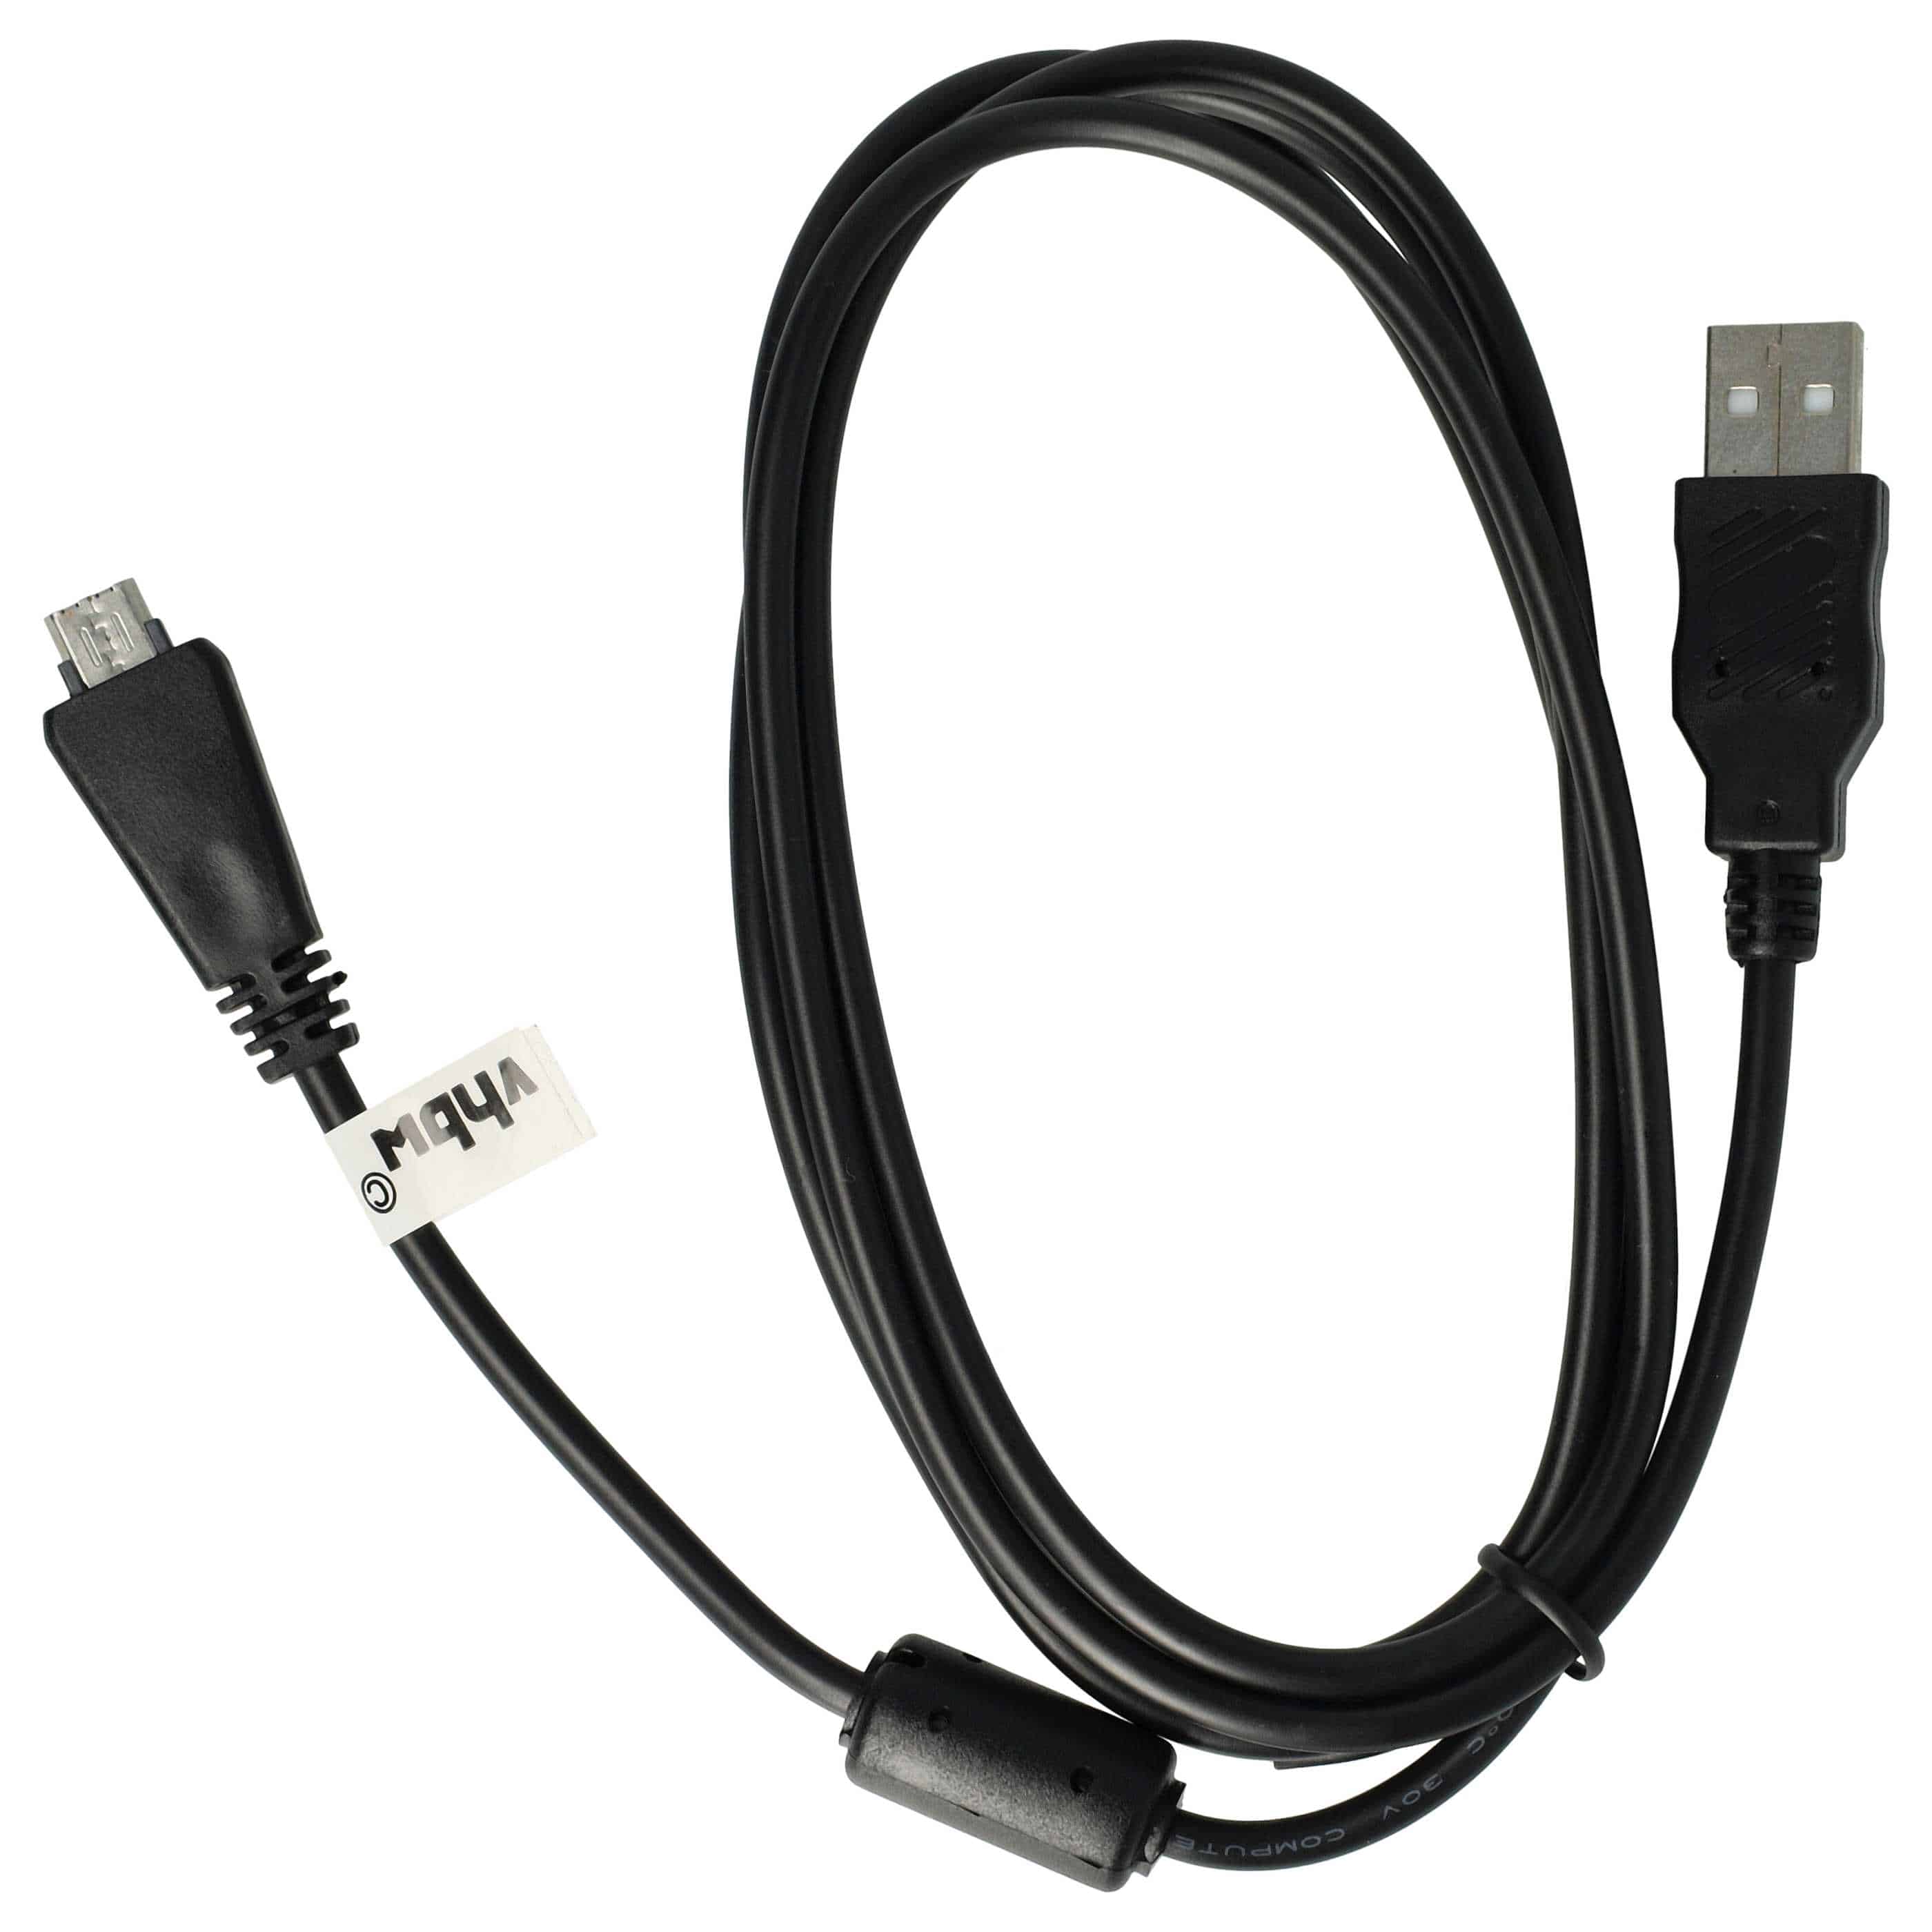 USB Data Cable replaces Sony VMC-MD3 (without AV function) for Sony Camera - 150 cm